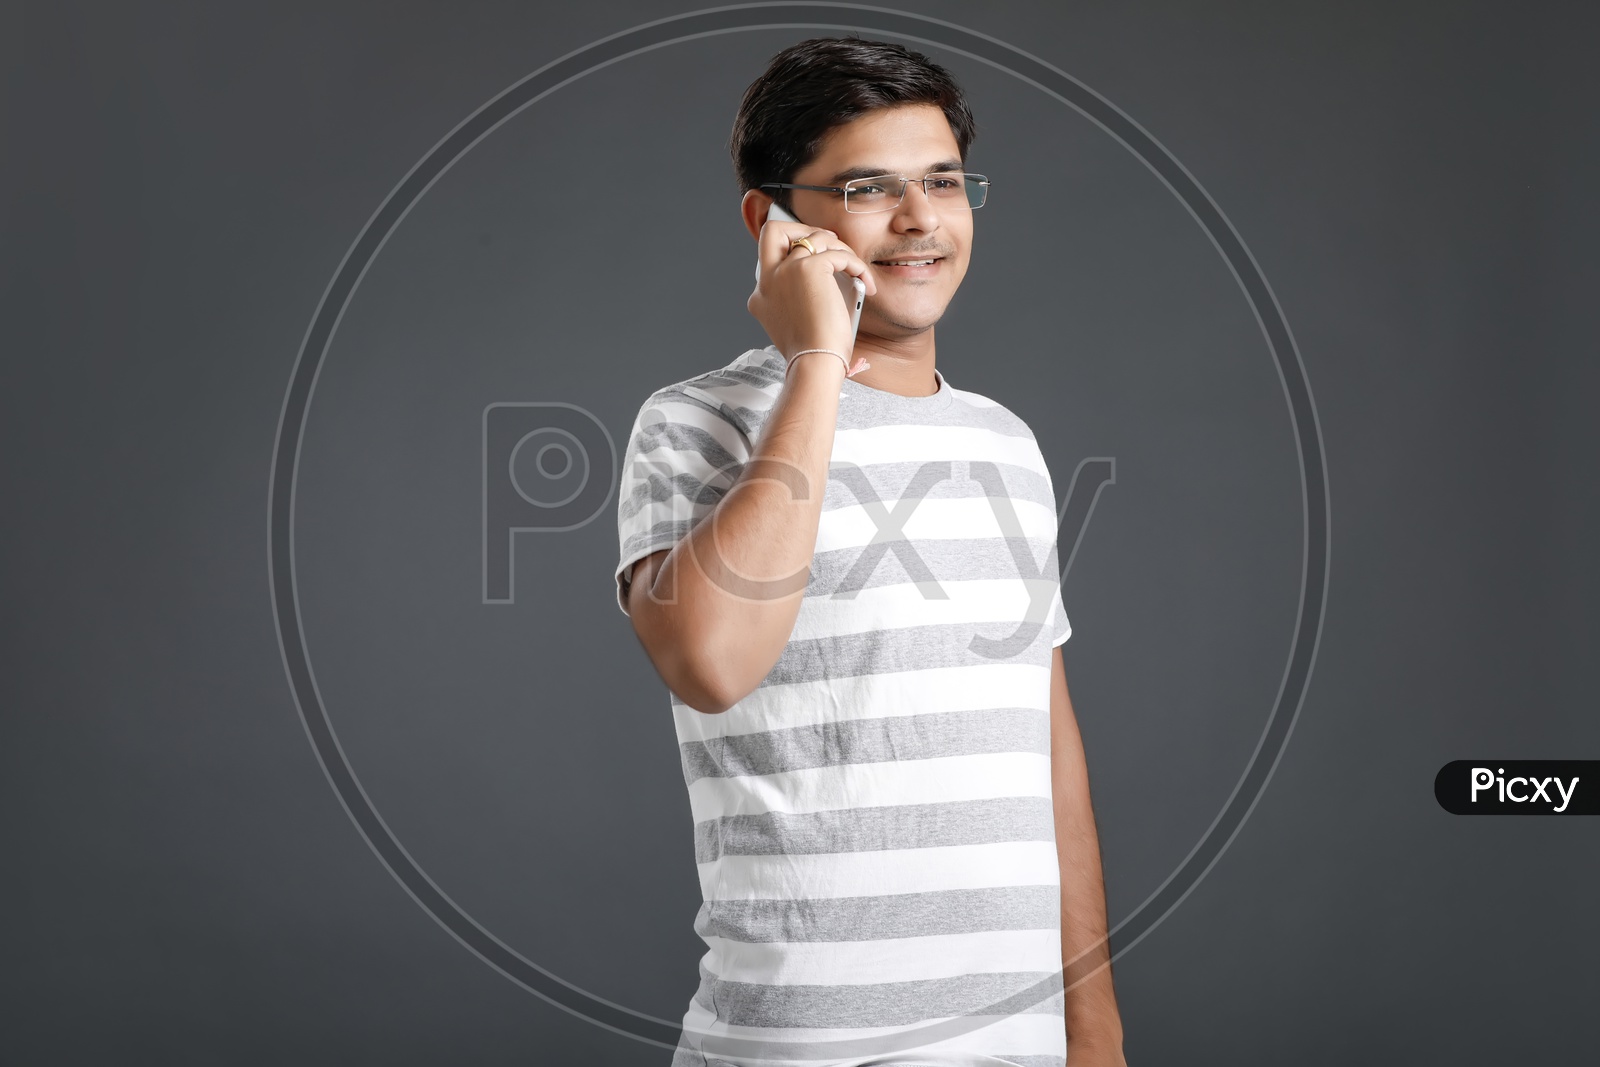 Young Man or Student Speaking On Mobile Or Smart Phone Over an Isolated Black Background